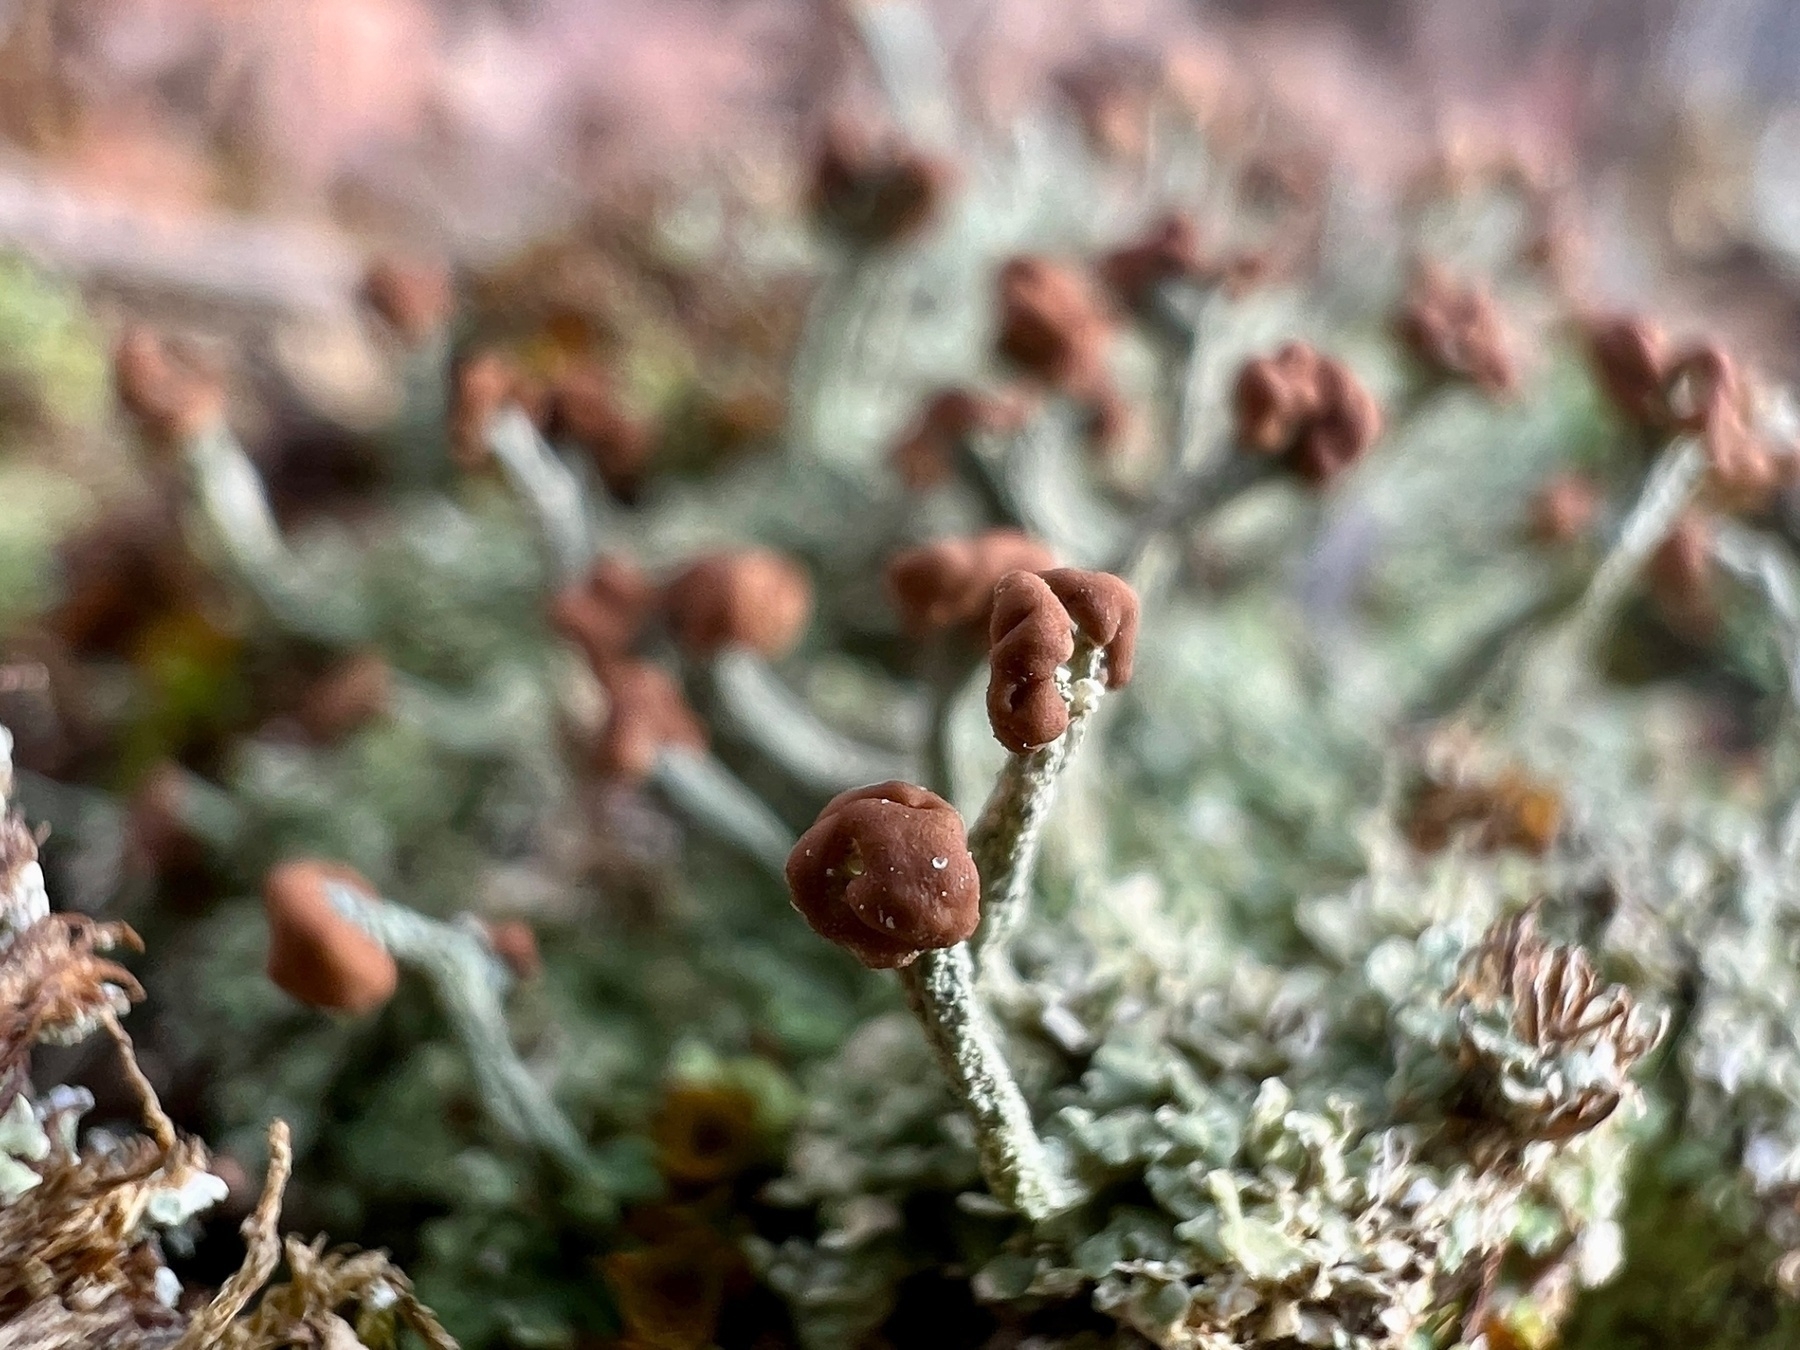 Macro image of small pale green lichen with dark brown caps on top. Blurred in the background are many more such lichen creating a miniature forest